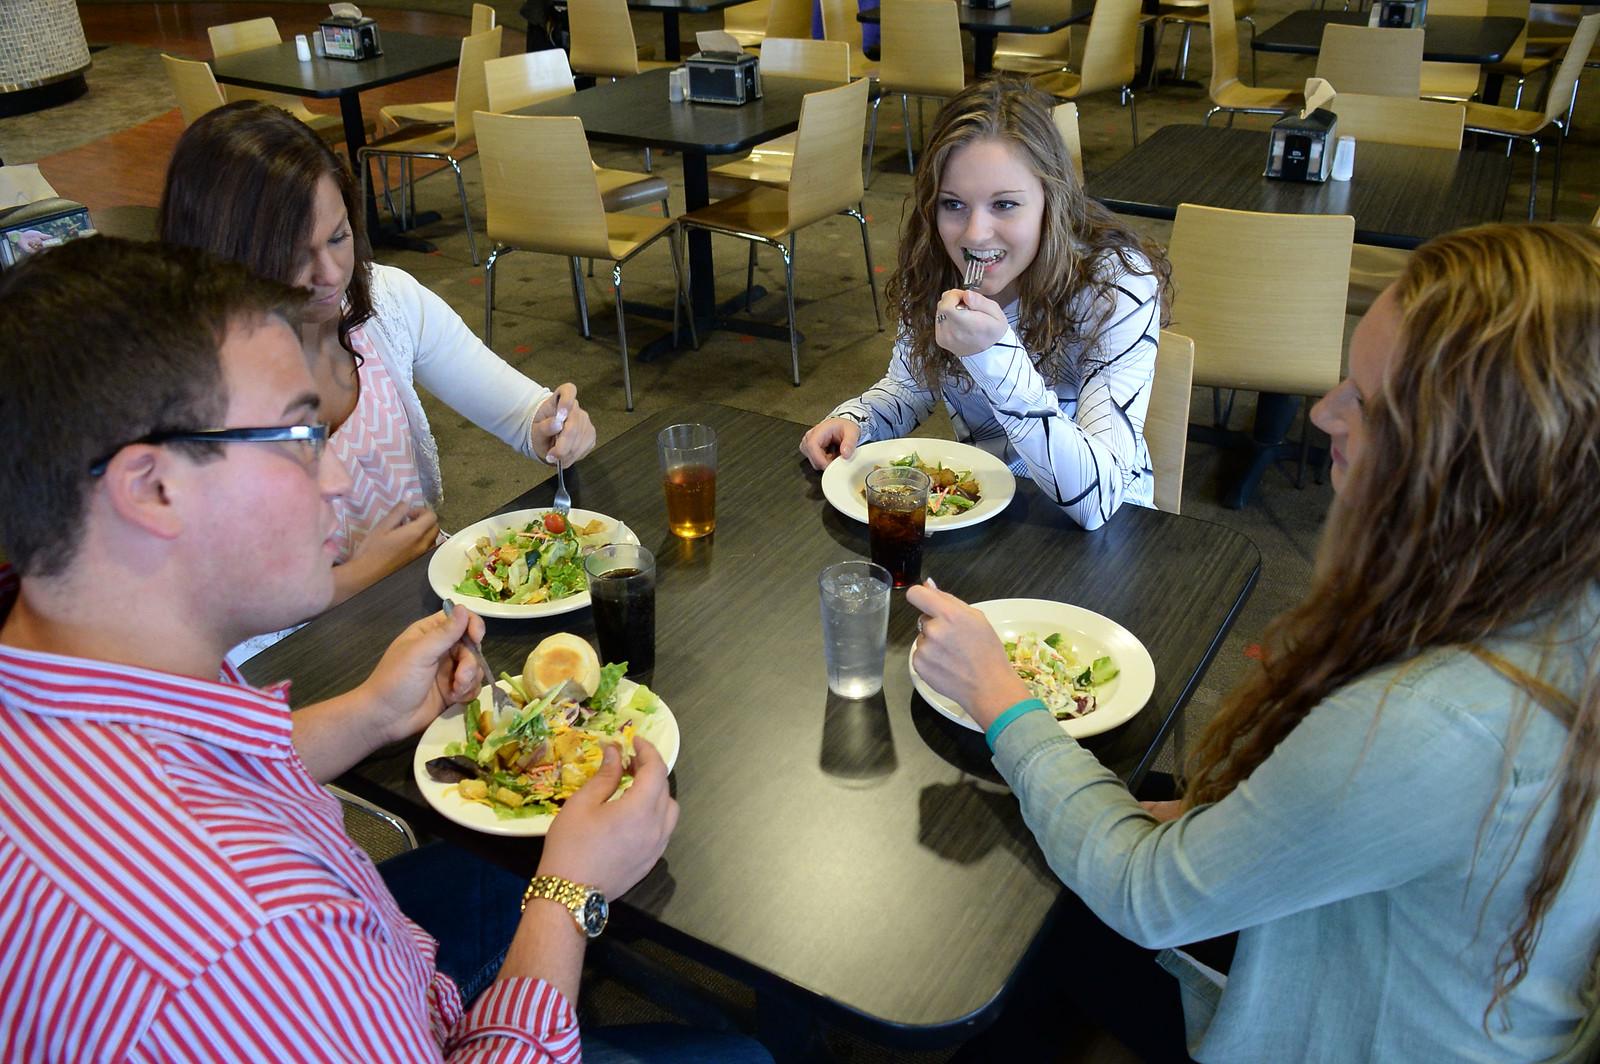 Four students sitting together at a table and eating salads